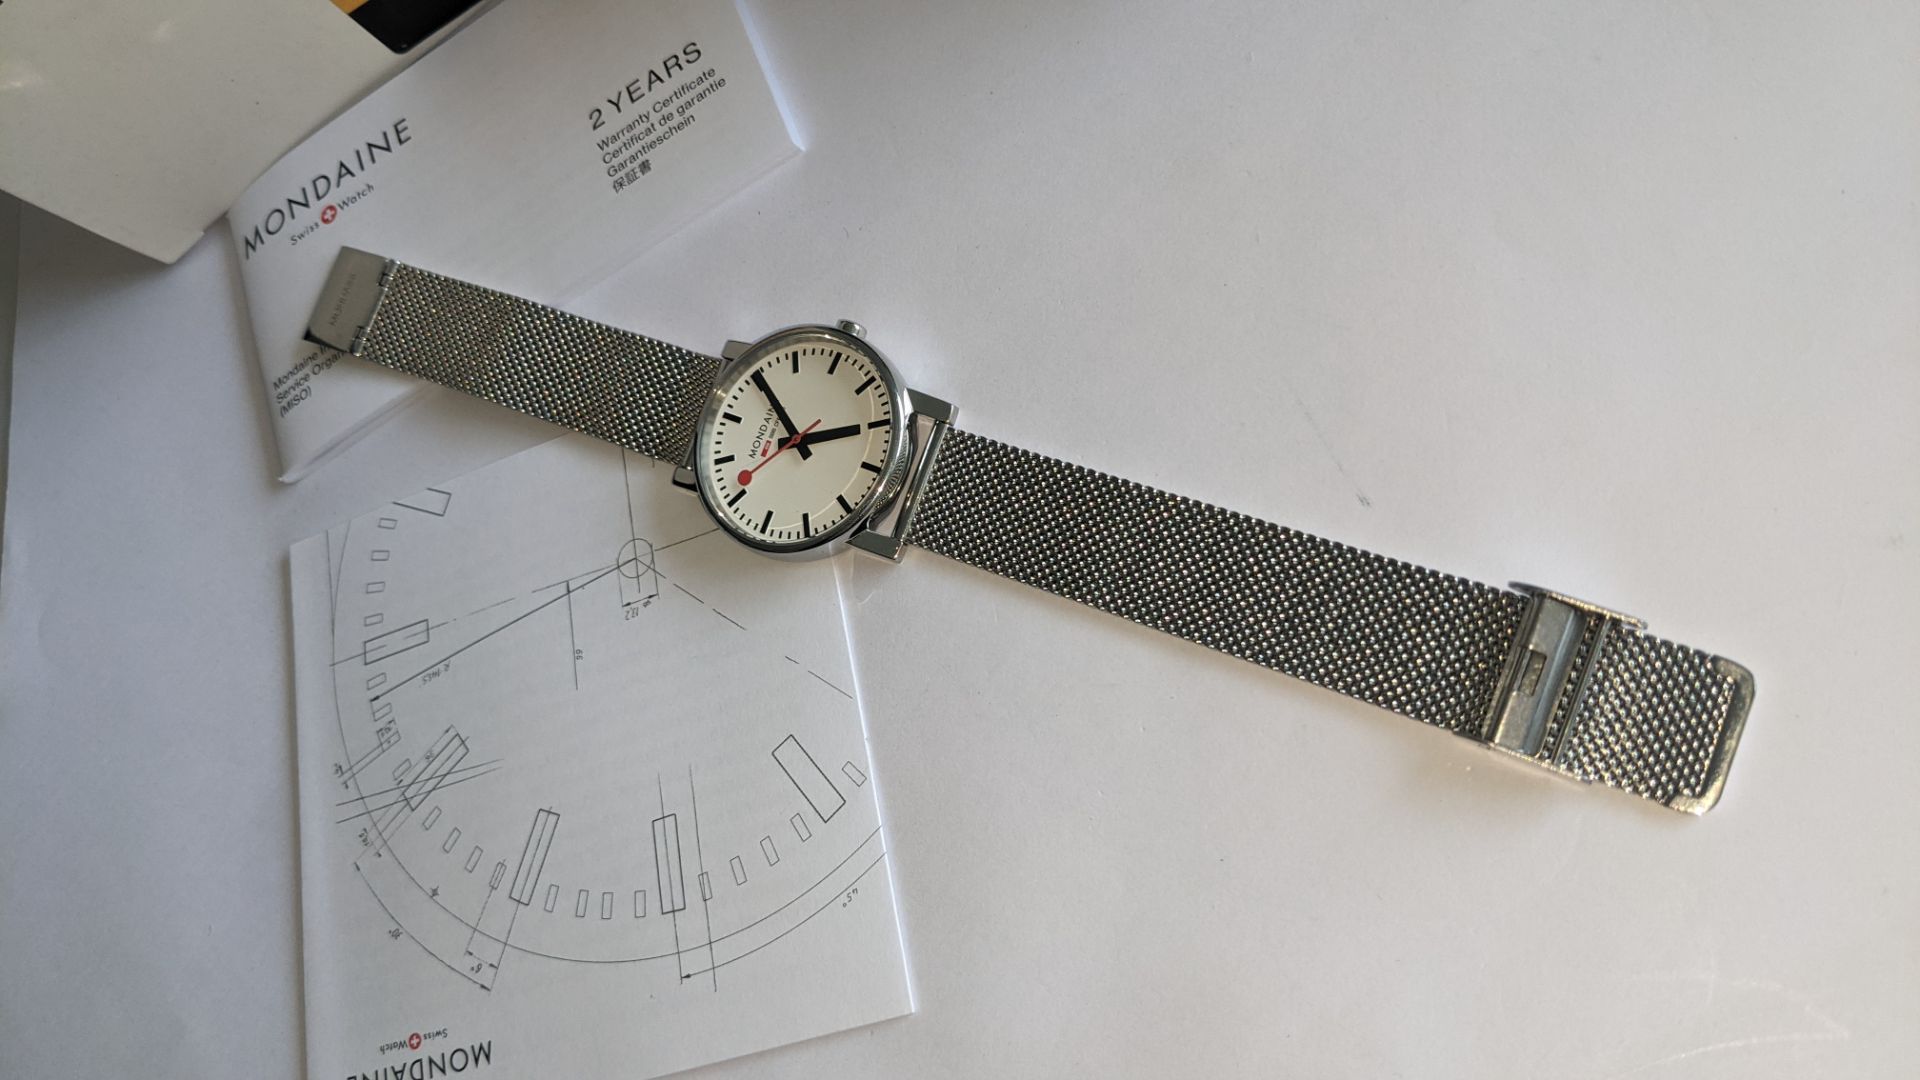 Mondaine watch on metal strap. Official Swiss Railways watch. No price tag. Stainless steel case, wa - Image 6 of 17